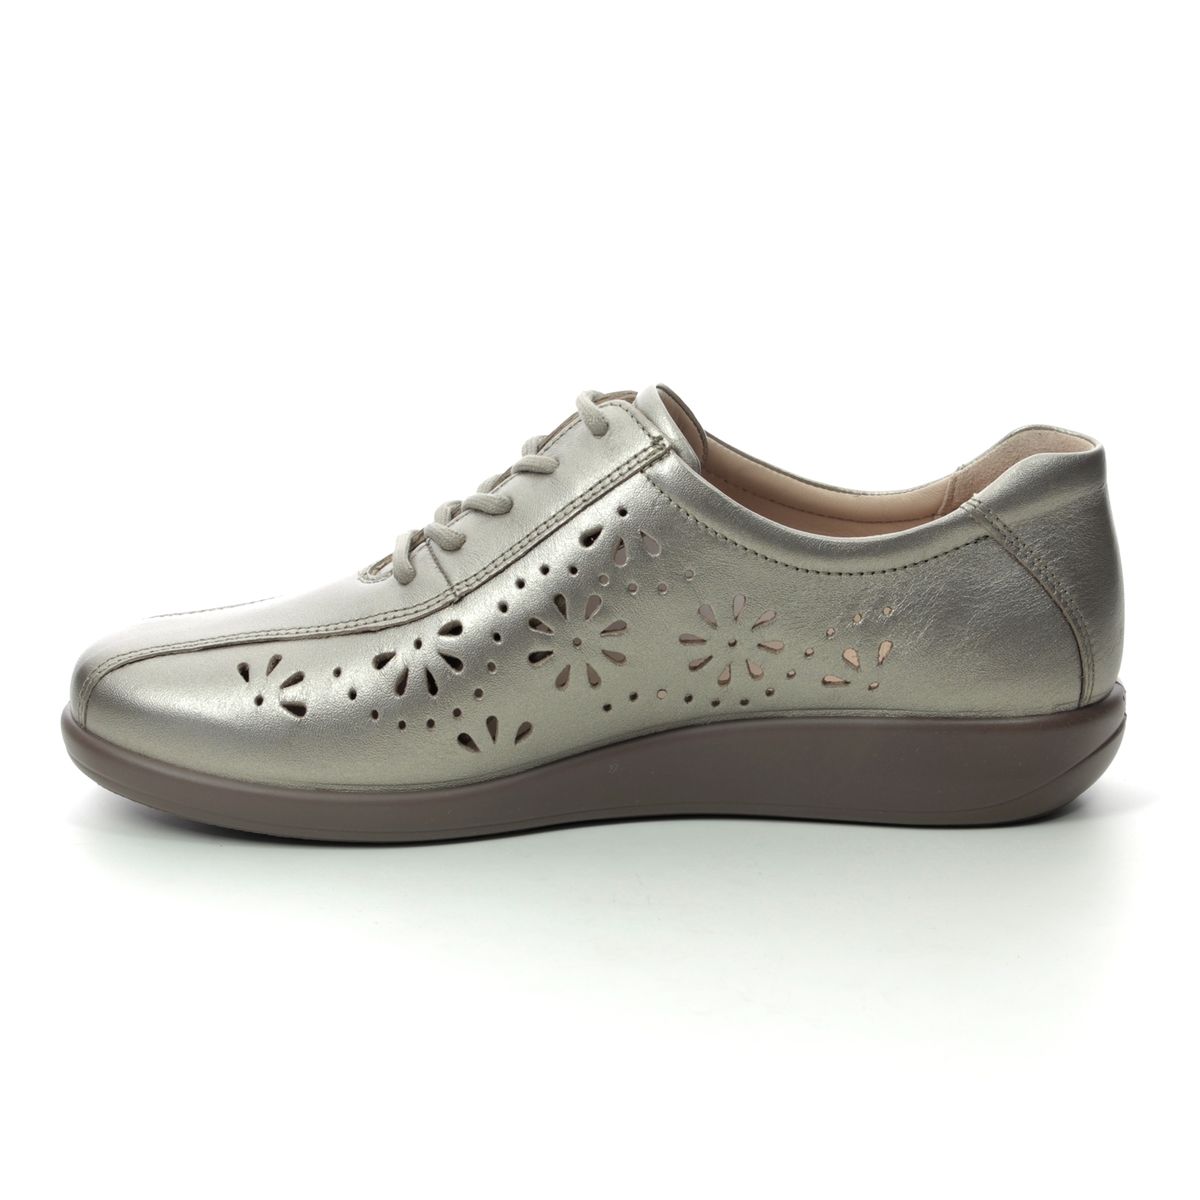 Hotter Ava E Fit Pewter Womens lacing shoes 0103-51